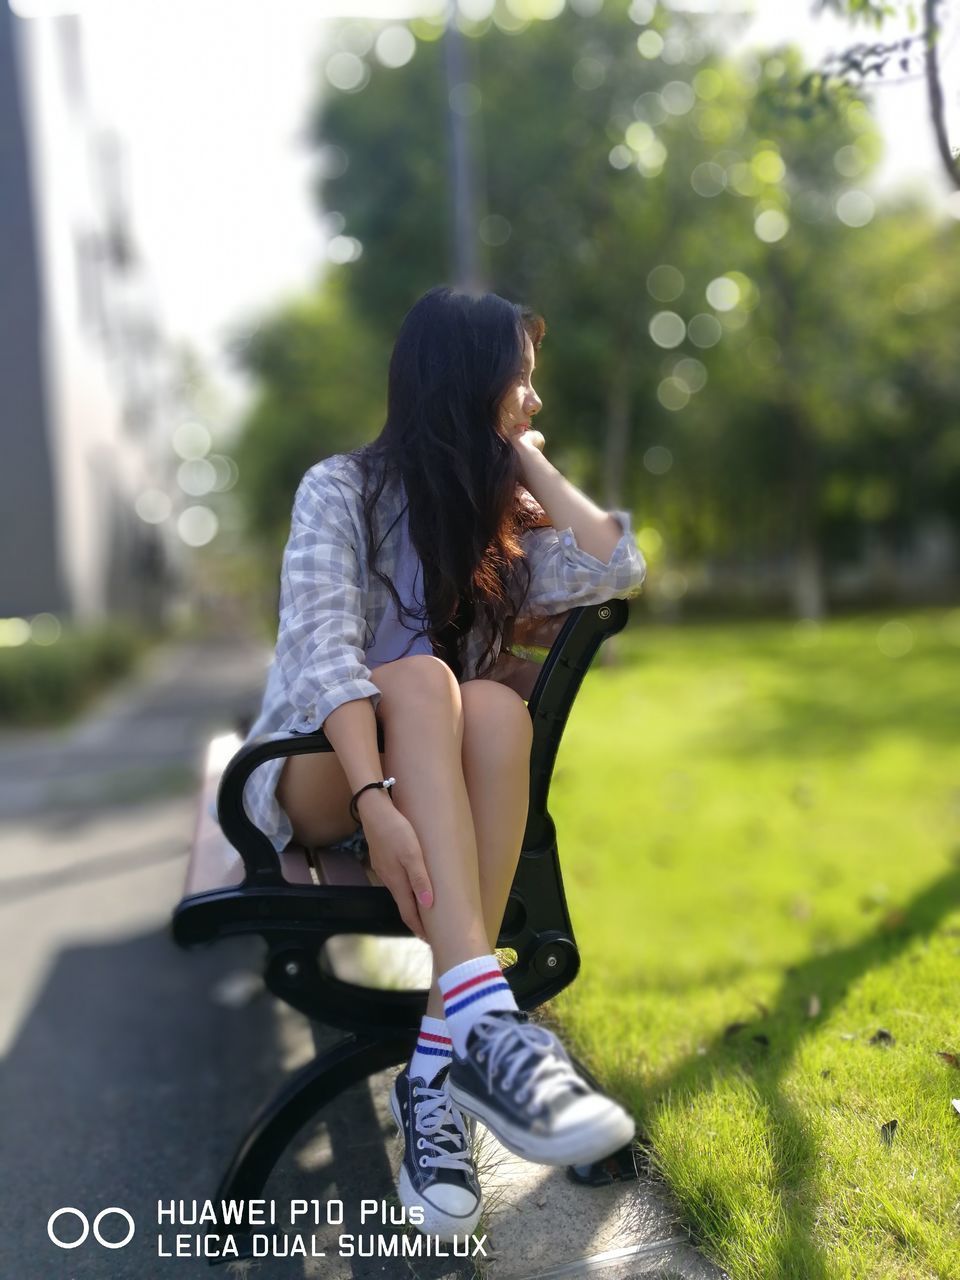 YOUNG WOMAN SITTING OUTDOORS